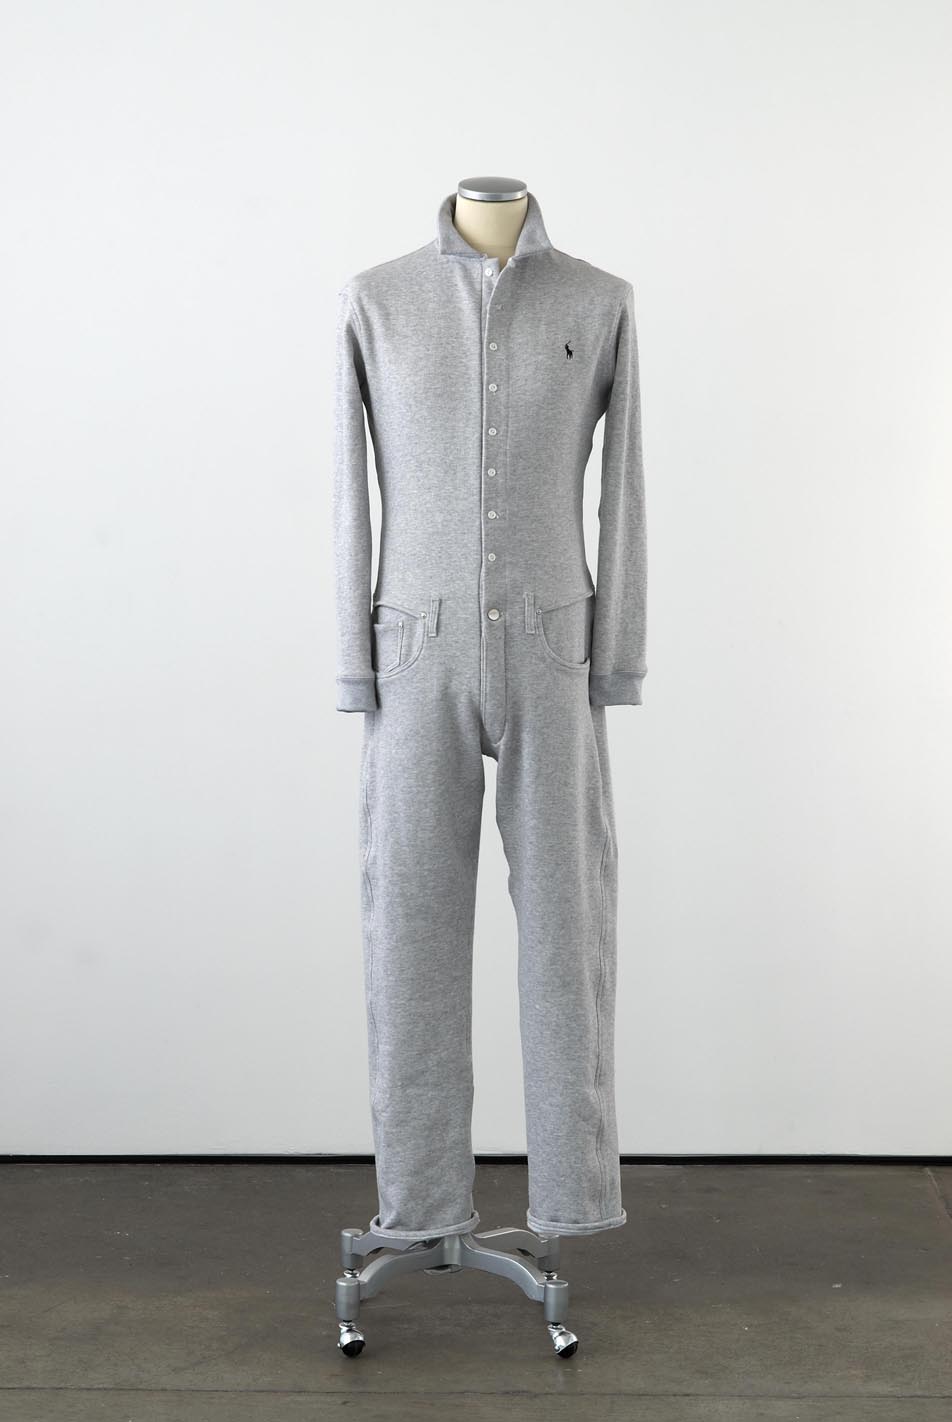     Matthew Darbyshire Standardised Production Clothing, Version 10 2009 Grey marle cotton, cotton jersey &amp; fittings on mannequin 185 x 45 x 34 cm 